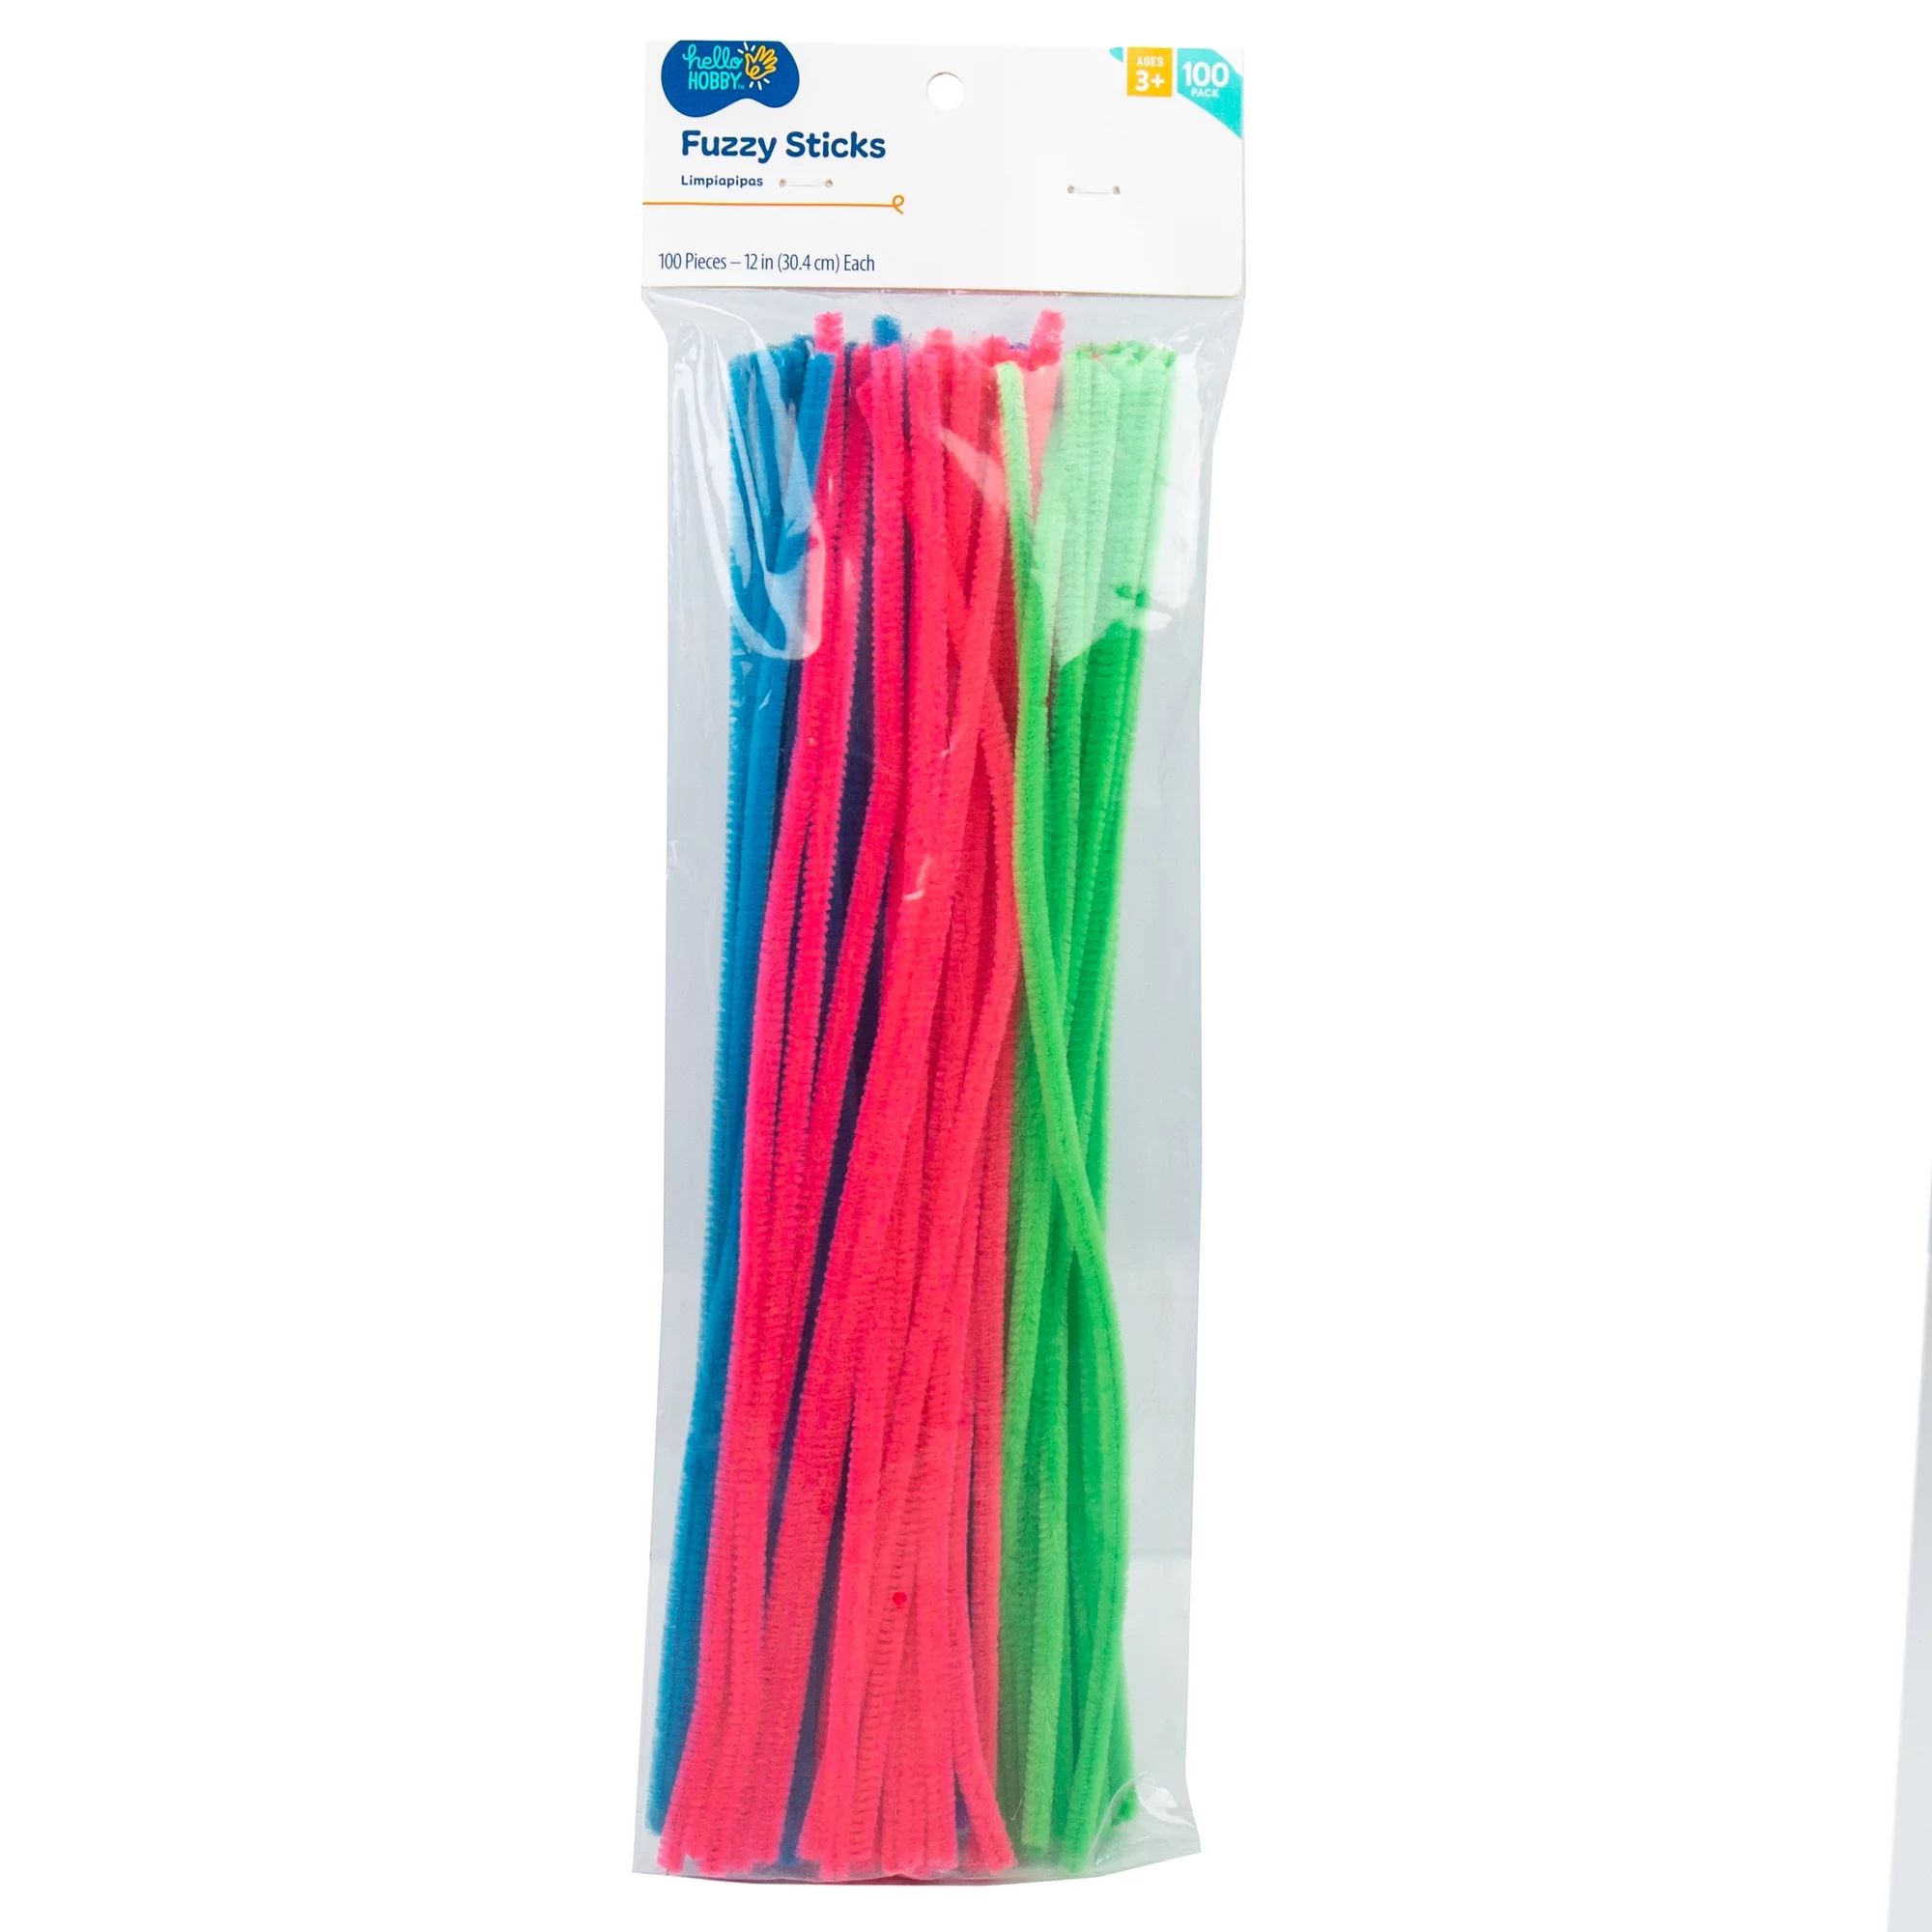 Hello Hobby Pastel Fuzzy Sticks Pipe Cleaners, 100-Pack | Walmart (US)